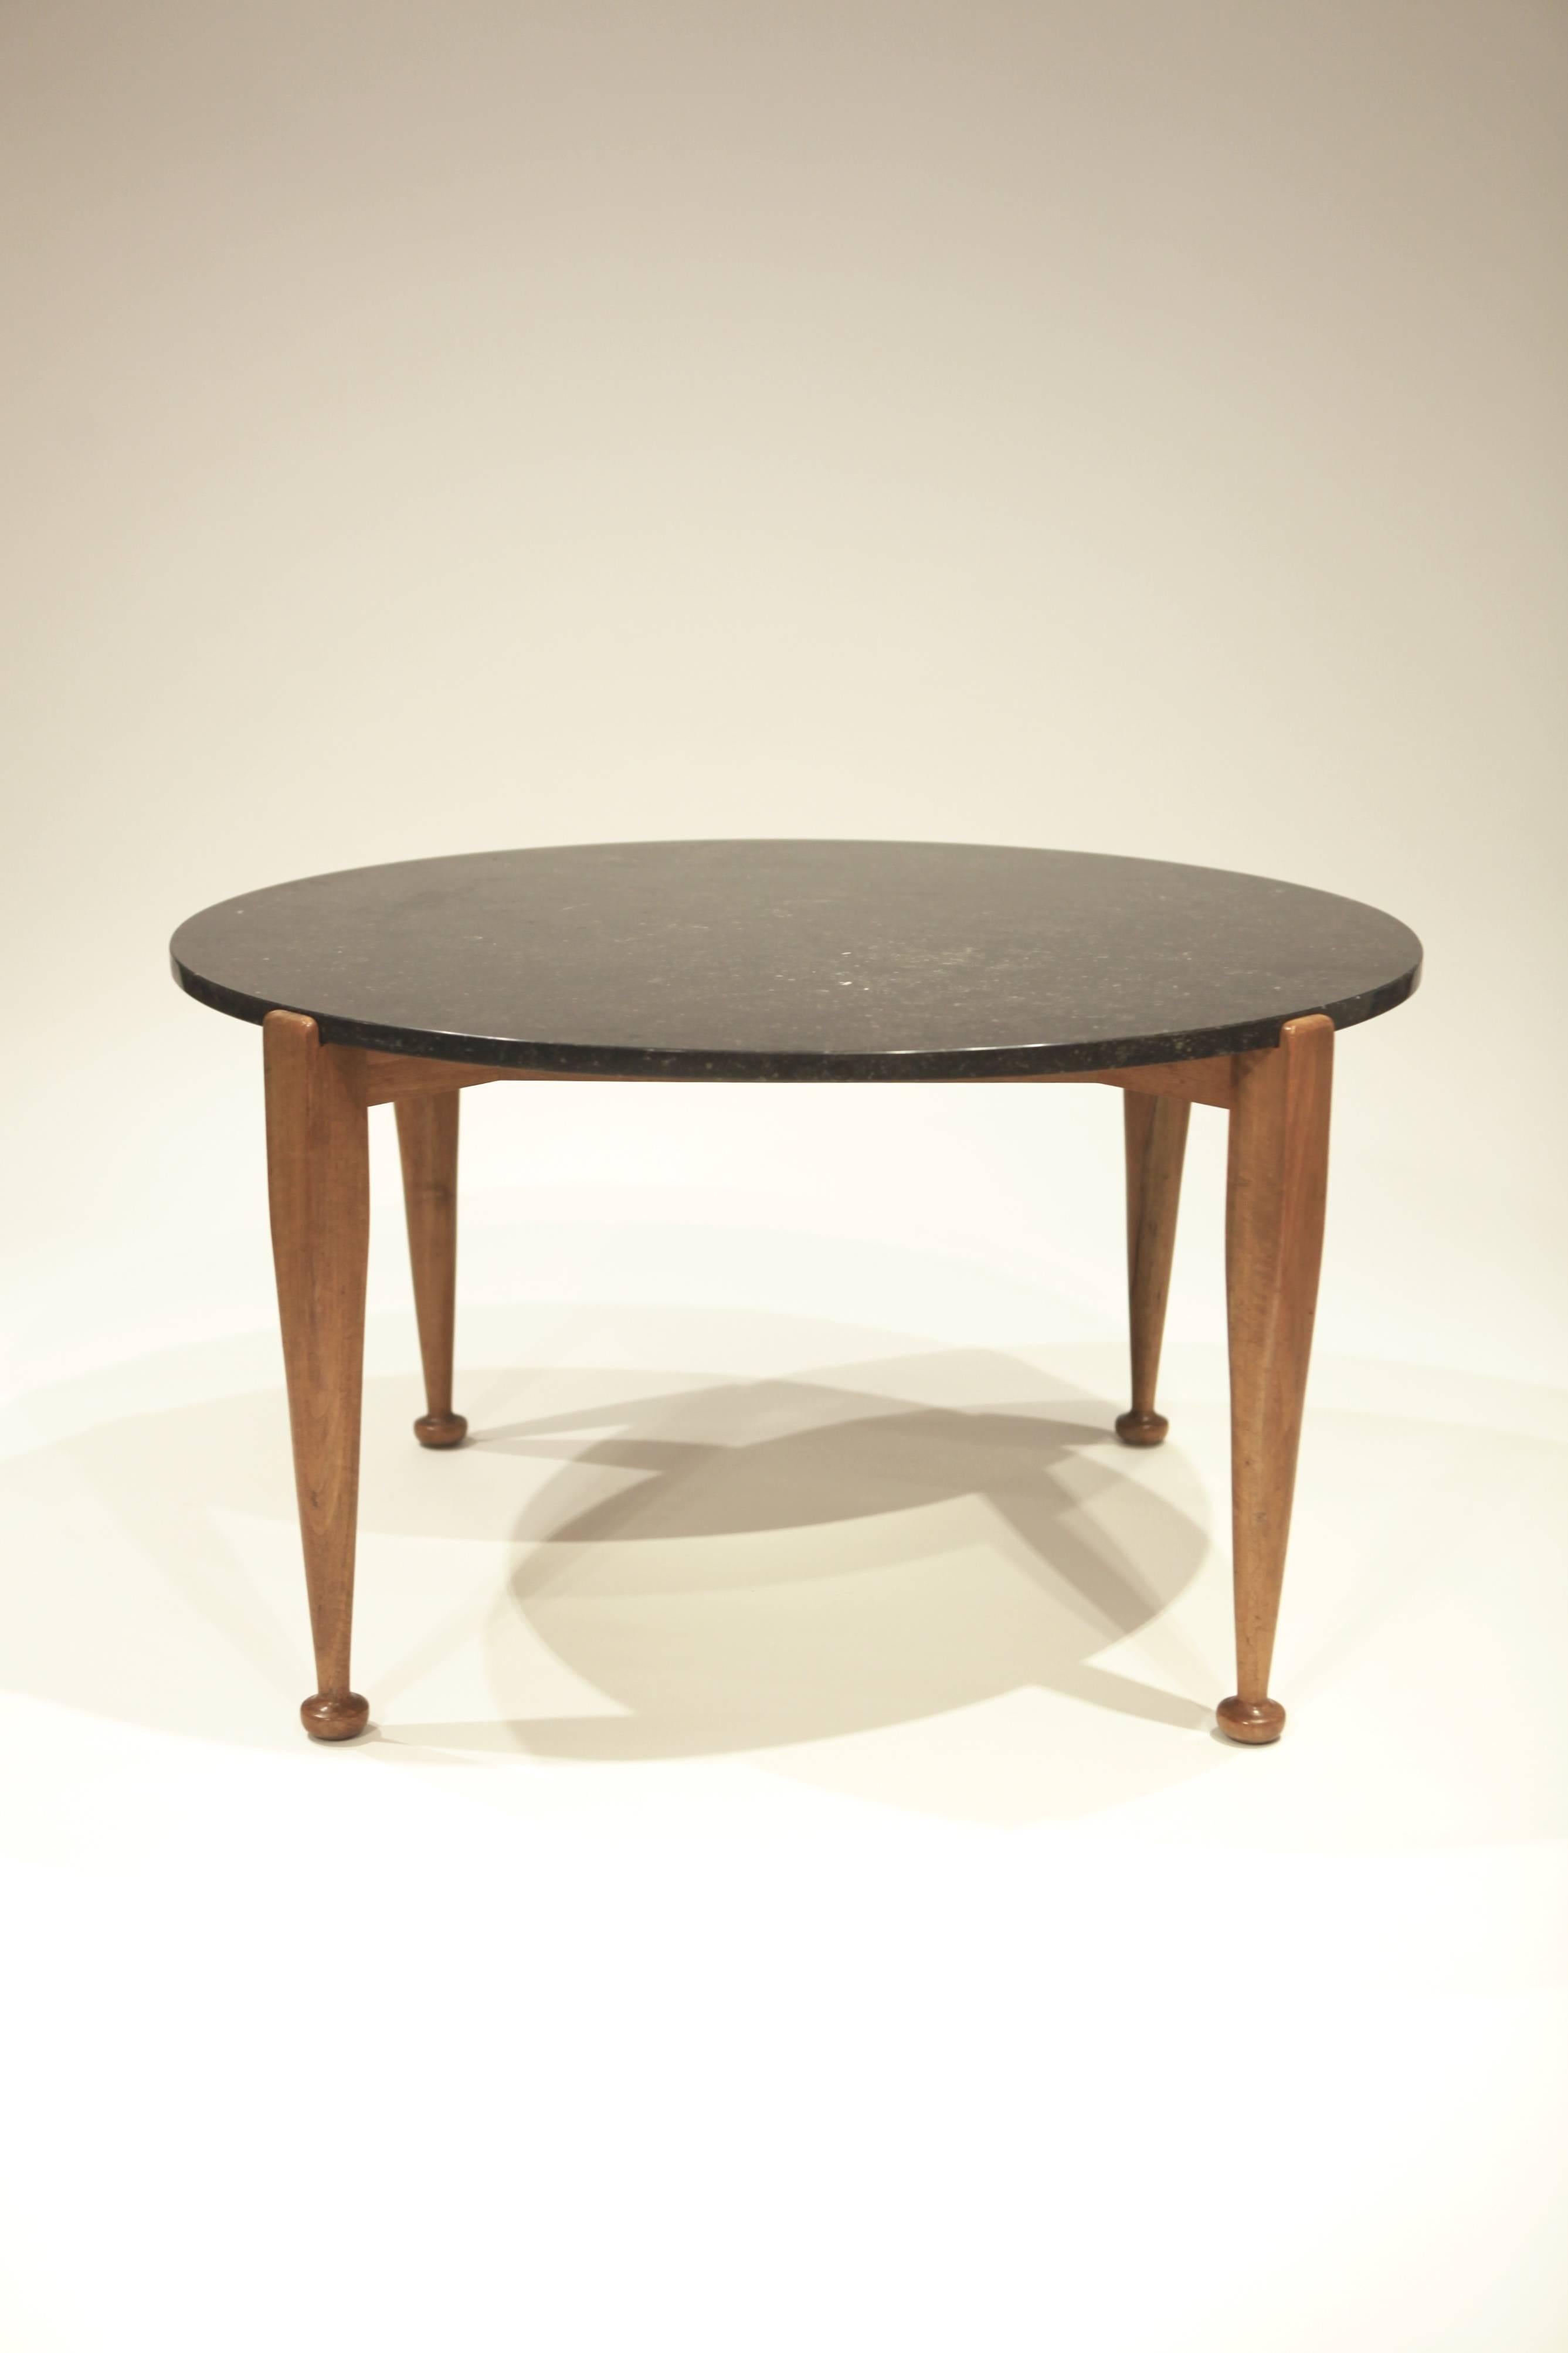 Swedish Josef Frank Coffee Table in Black Marble and Walnut, 1950 For Sale